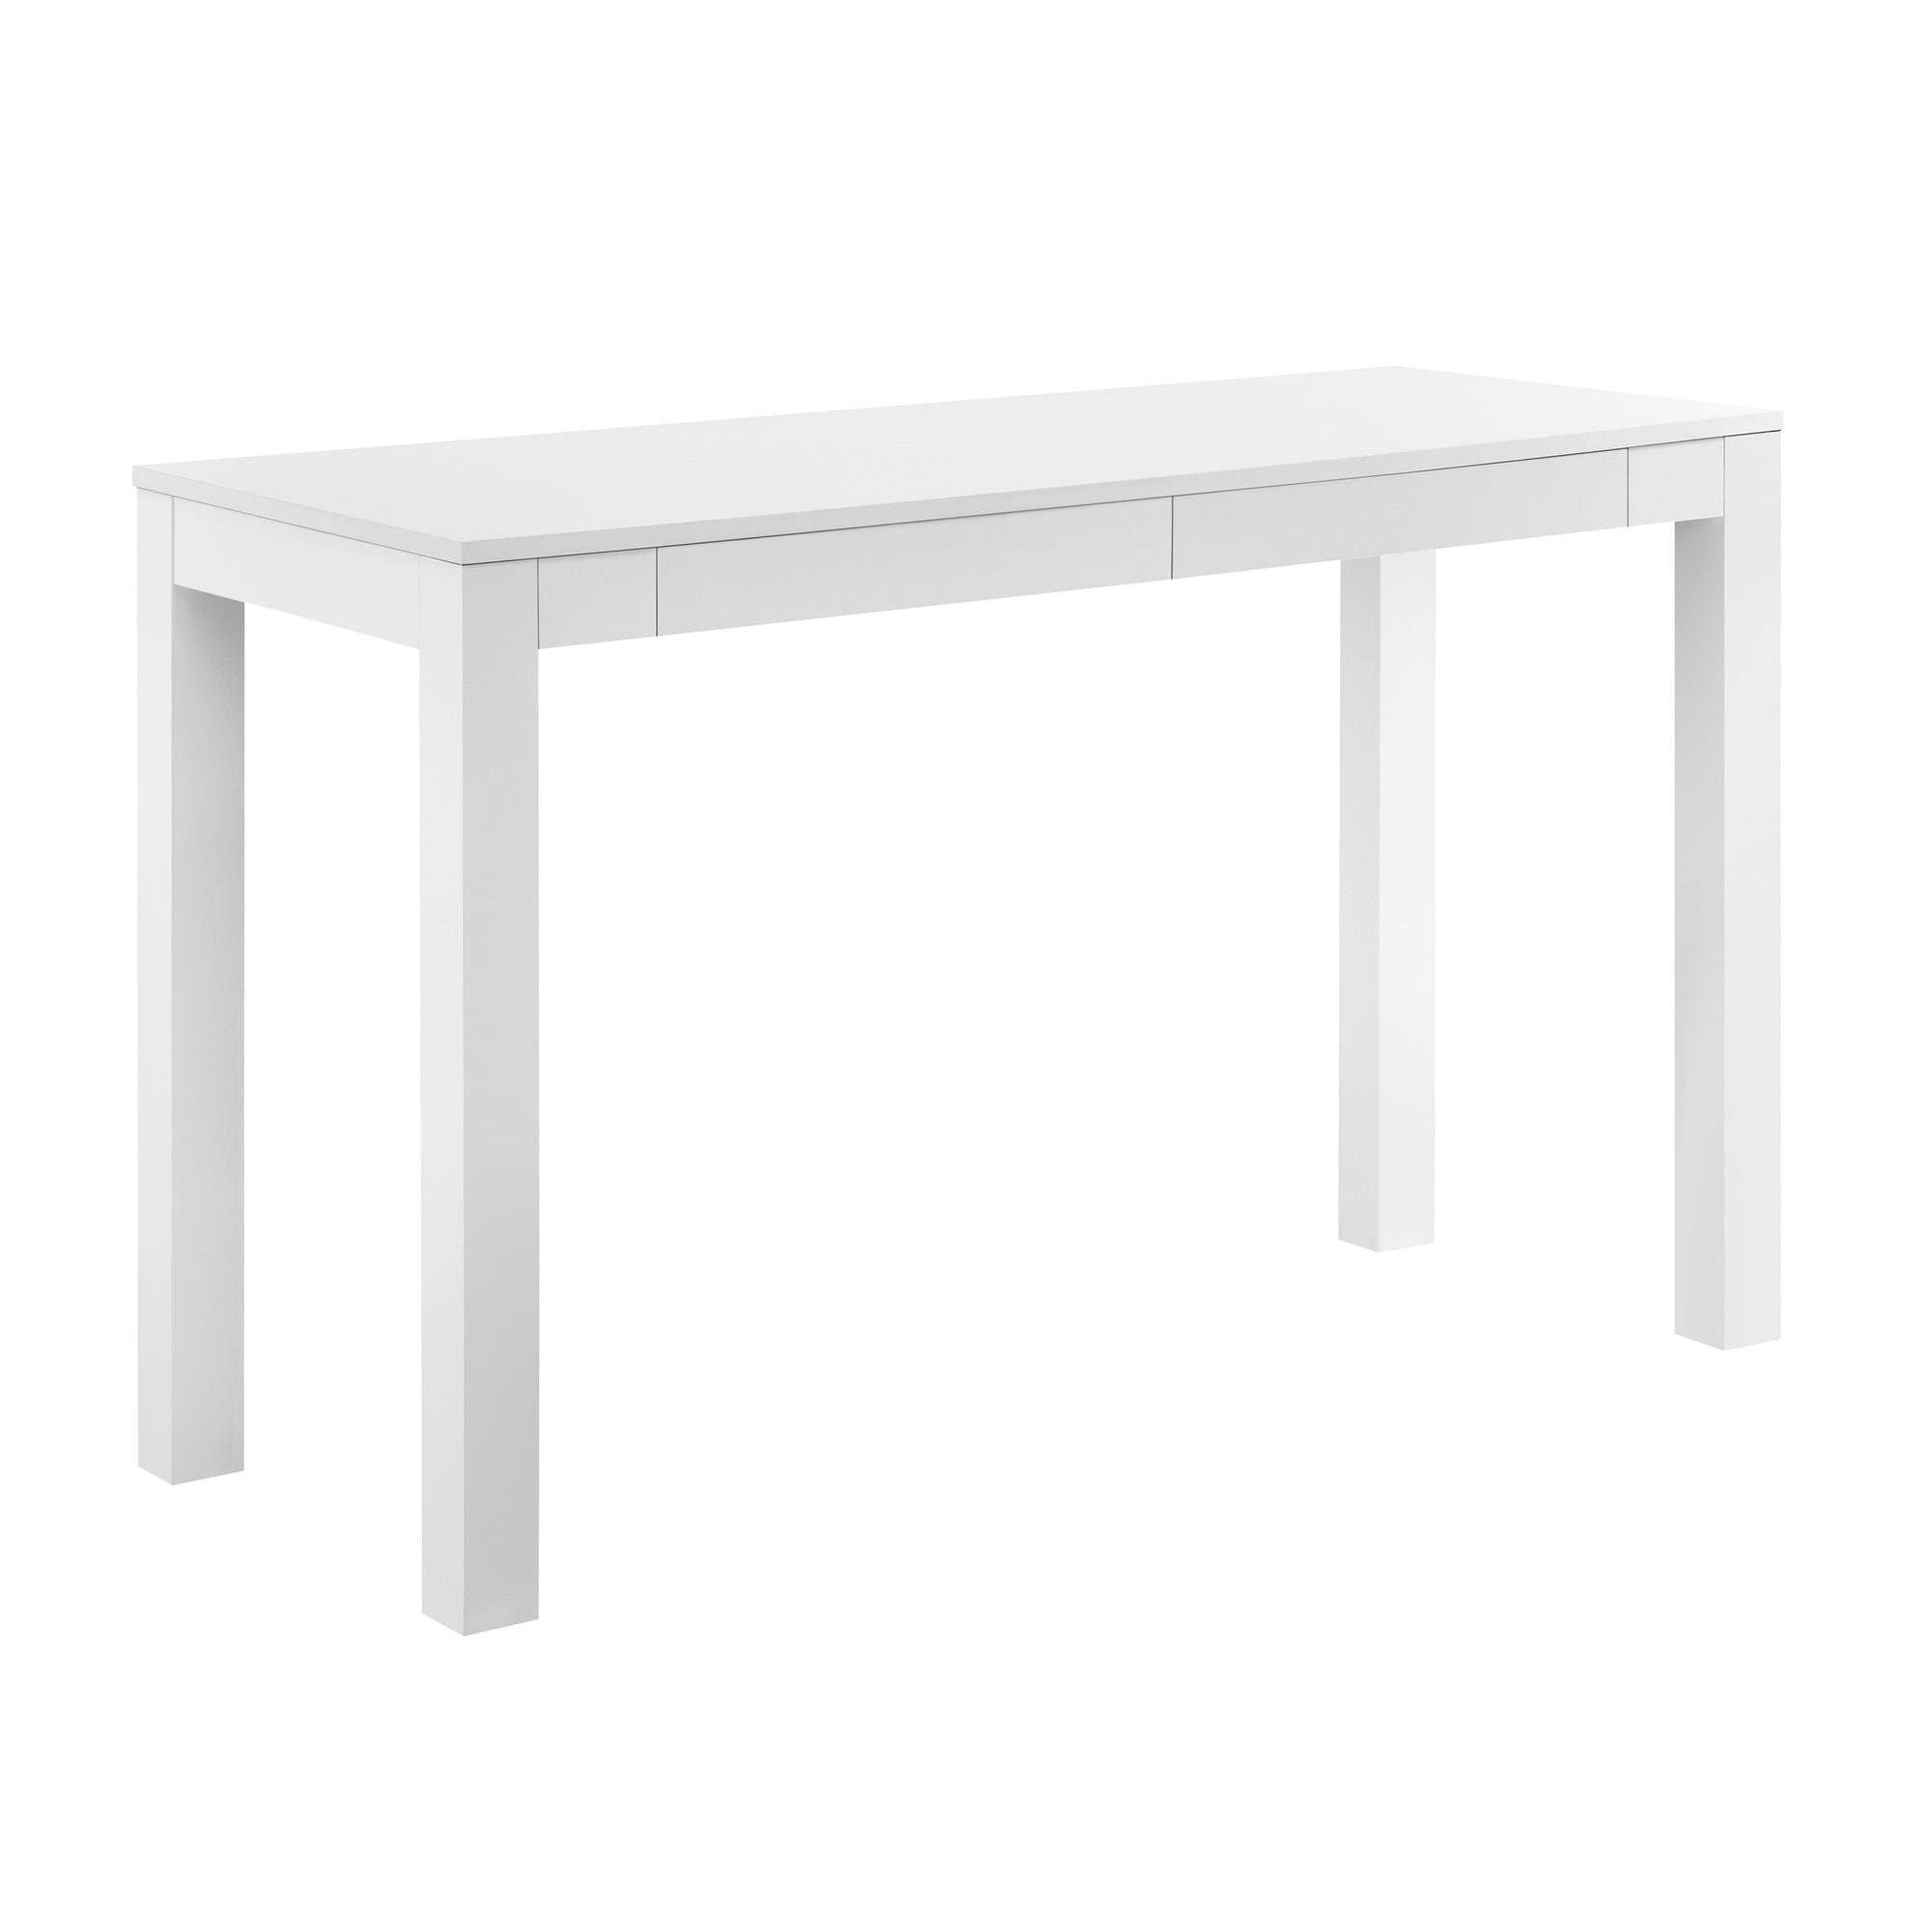 Ameriwood Home Parsons Xl Desk with 2 Drawers, White | Amazon (US)